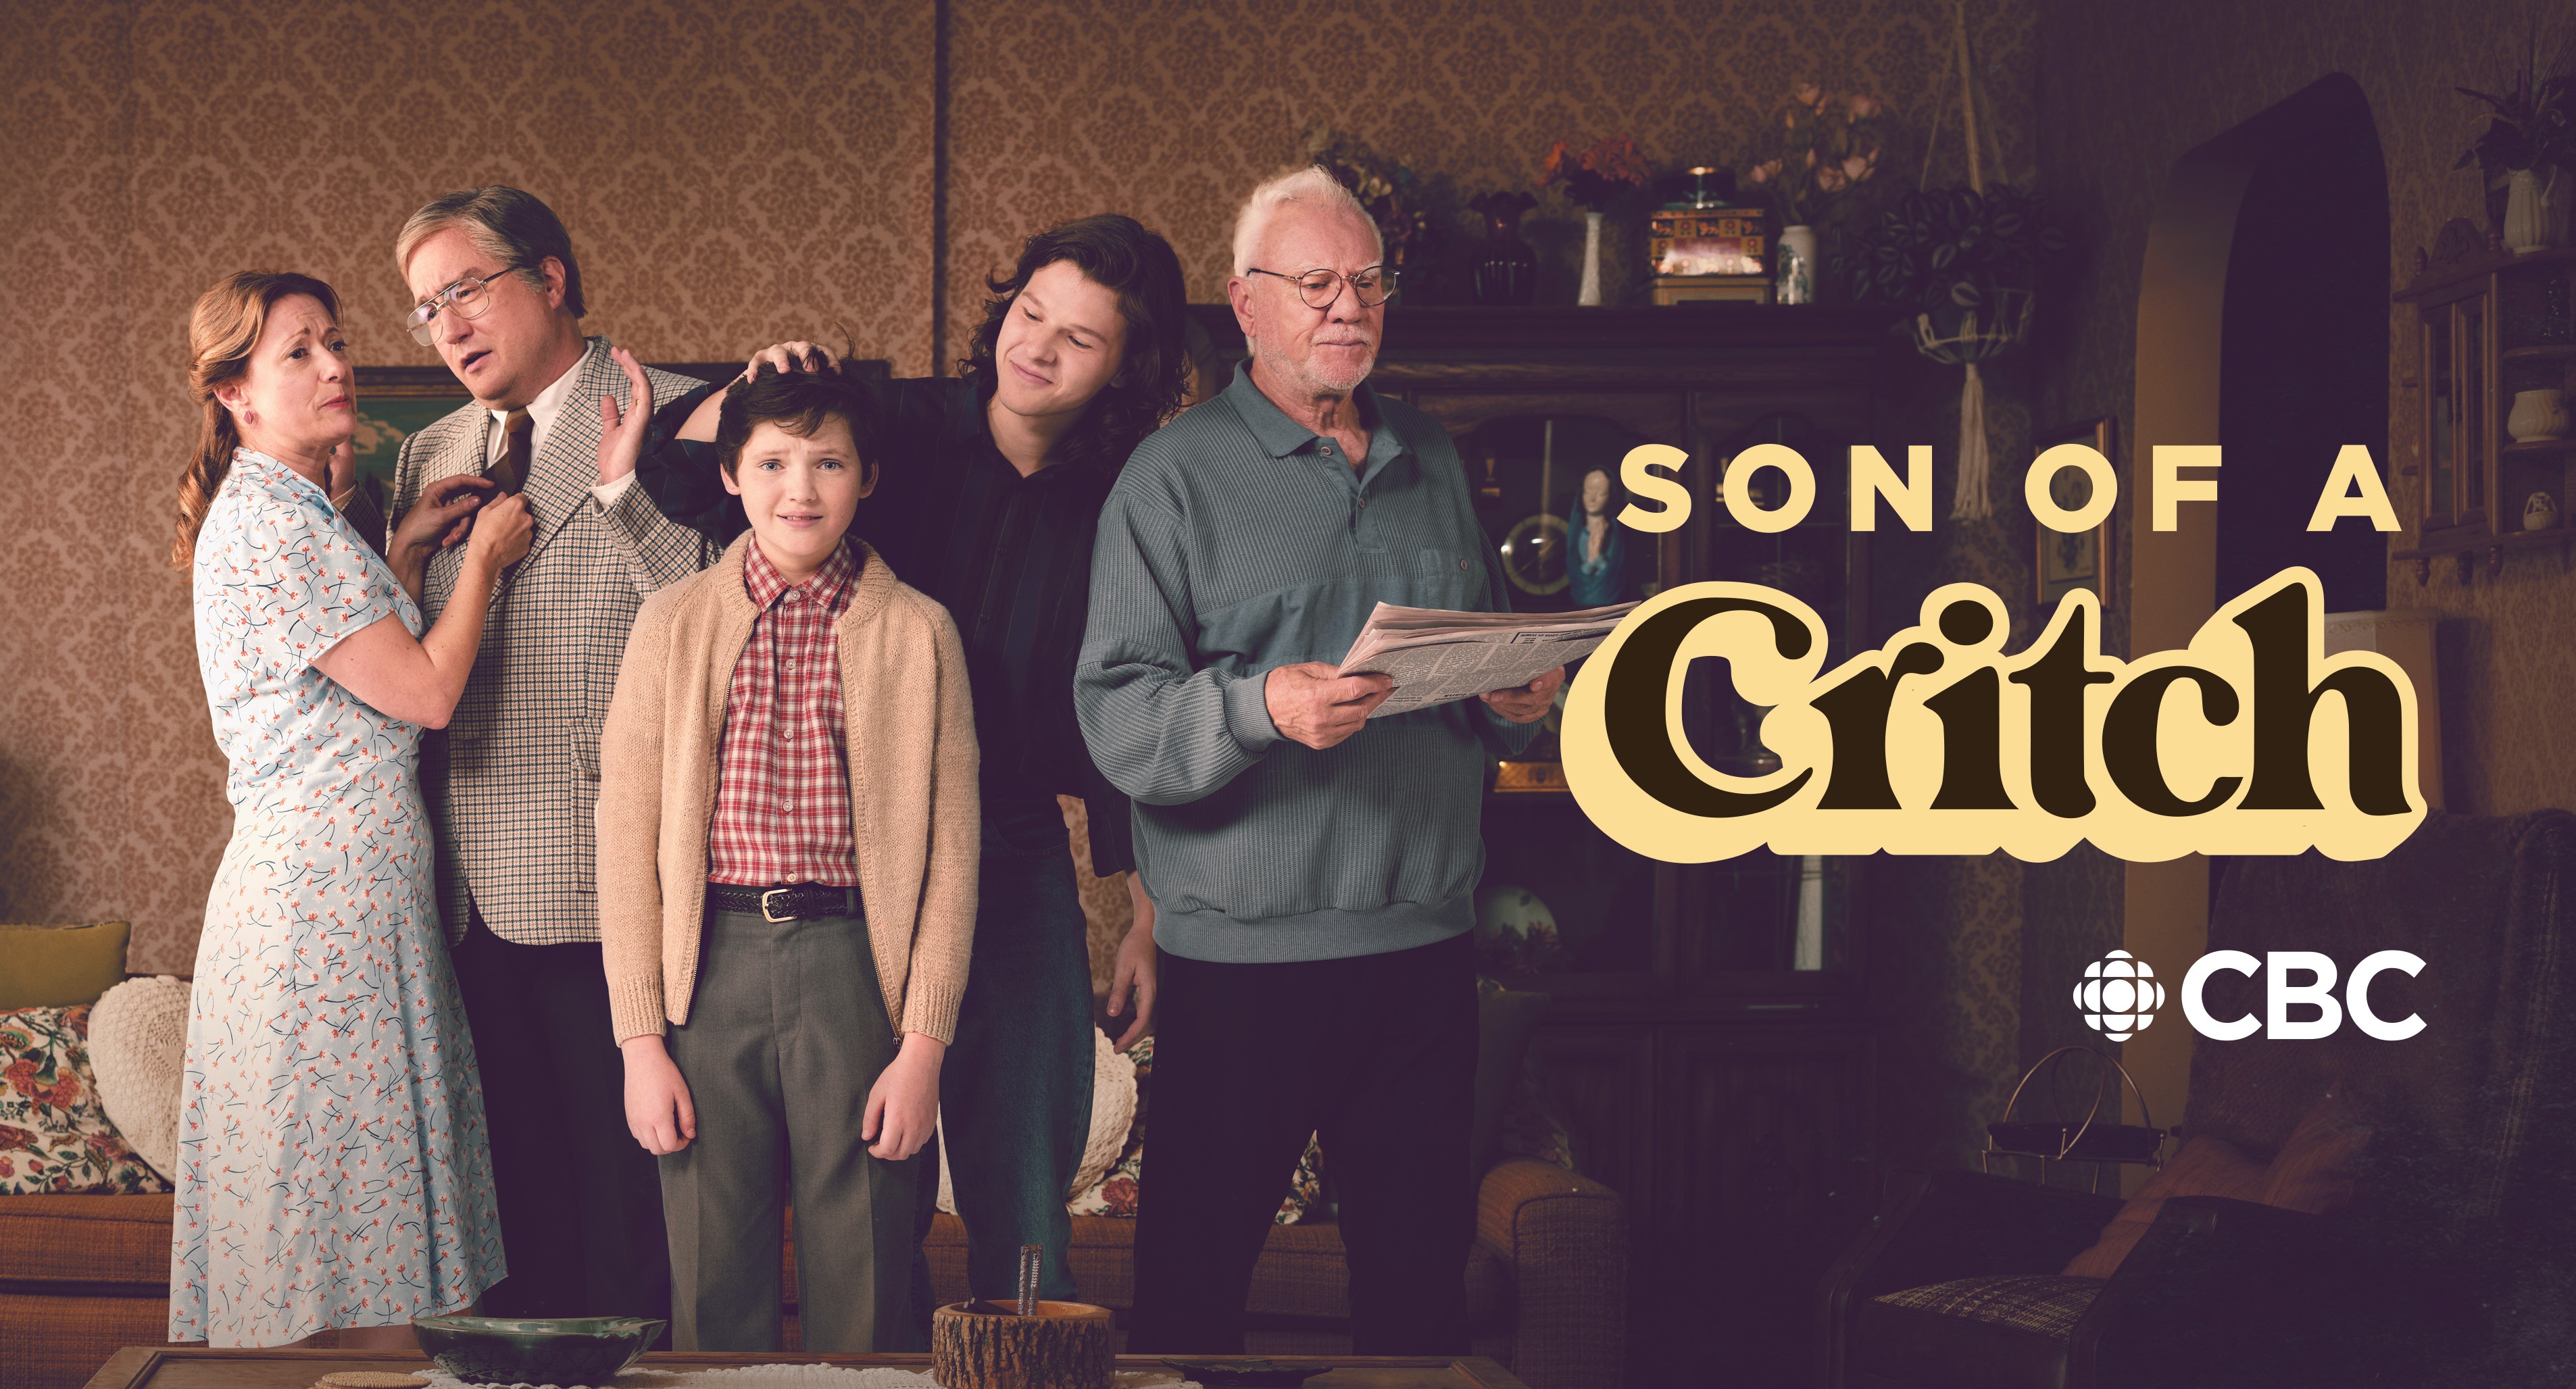 Son of Critch TV series promotional photo featuring members of the Critch family